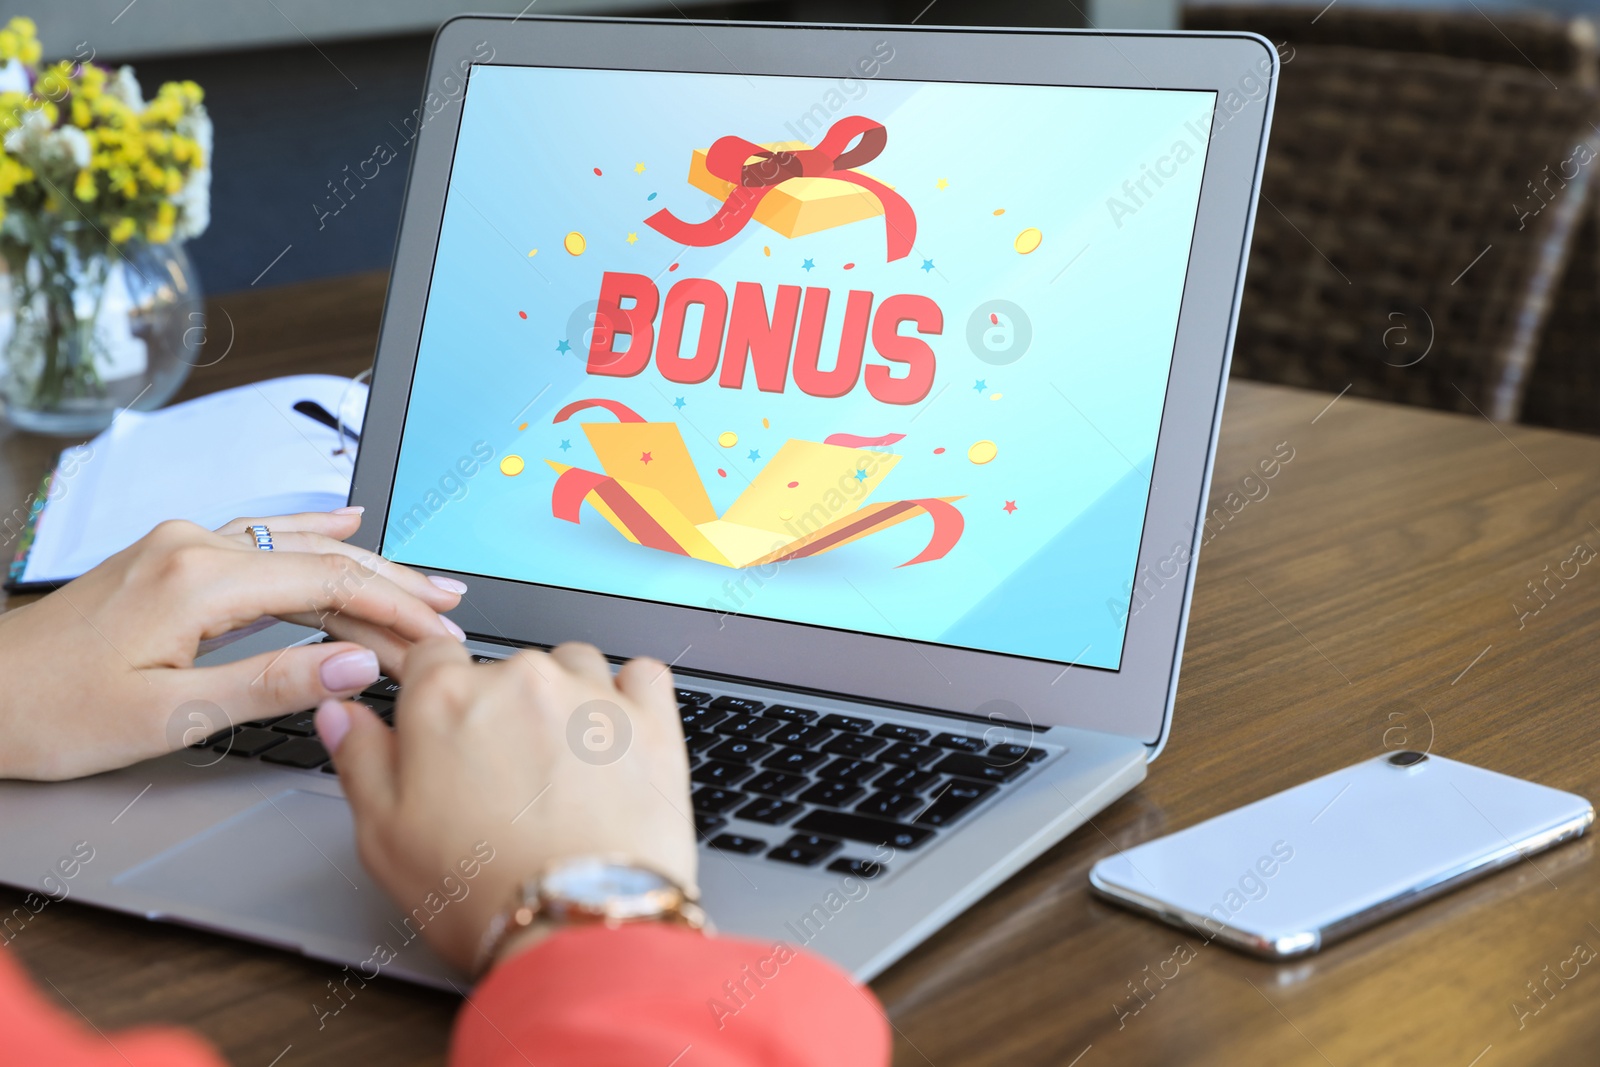 Image of Bonus gaining. Woman using laptop at wooden table indoors, closeup. Illustration of open gift box, word and confetti on device screen